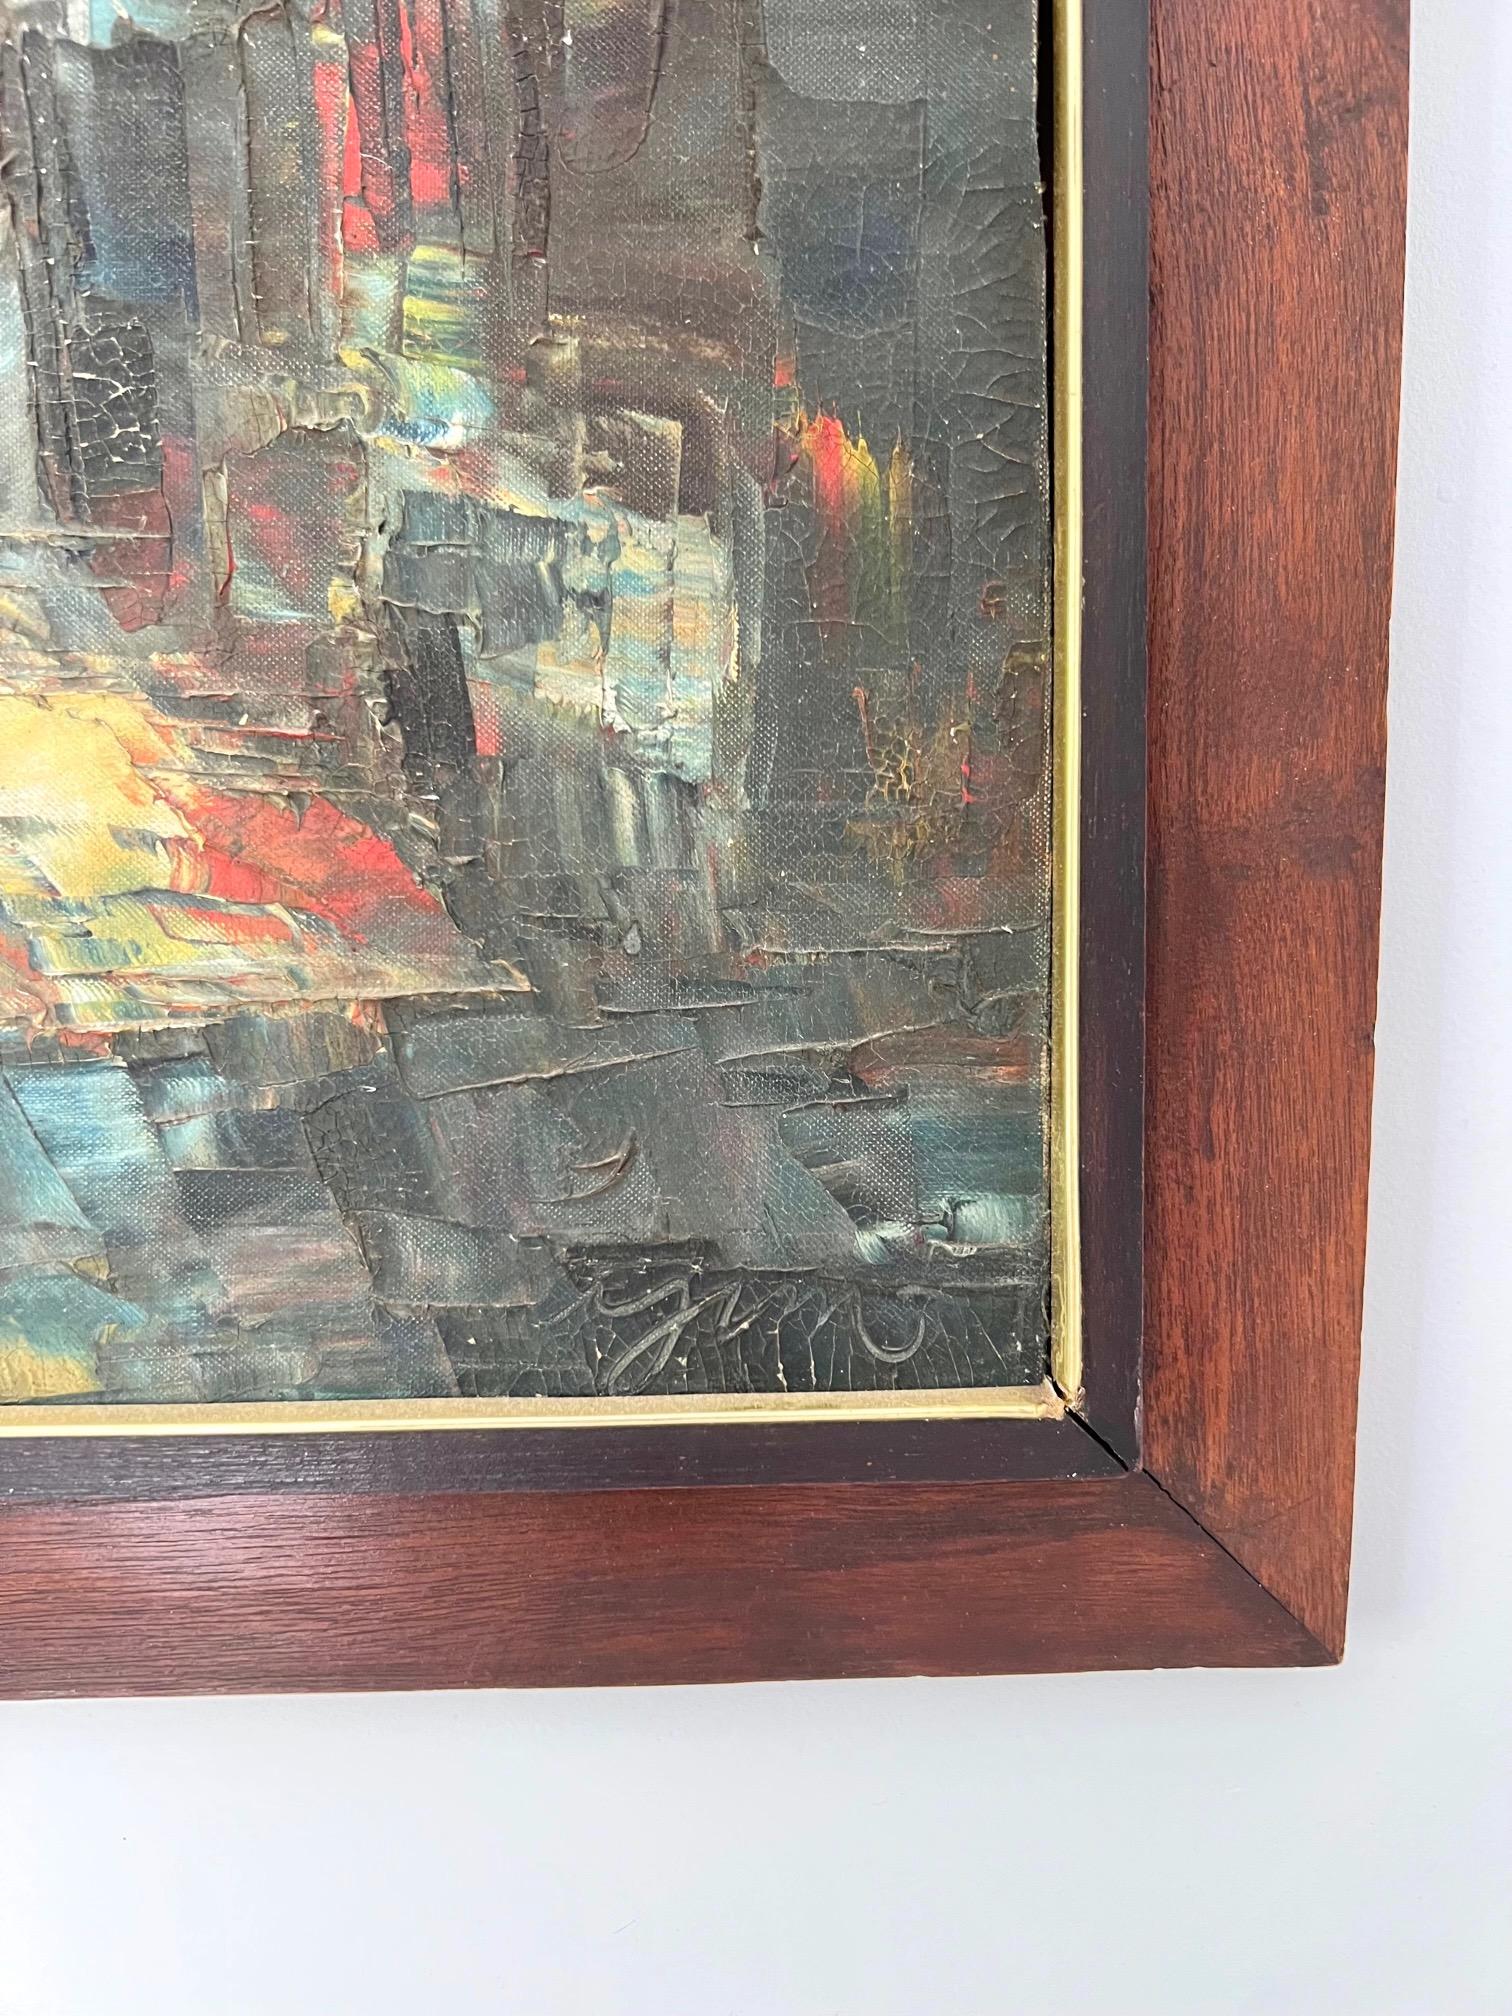 Abstract Painting in Original Wood Frame, Rowboats Oil on Board, c. 1950s For Sale 5